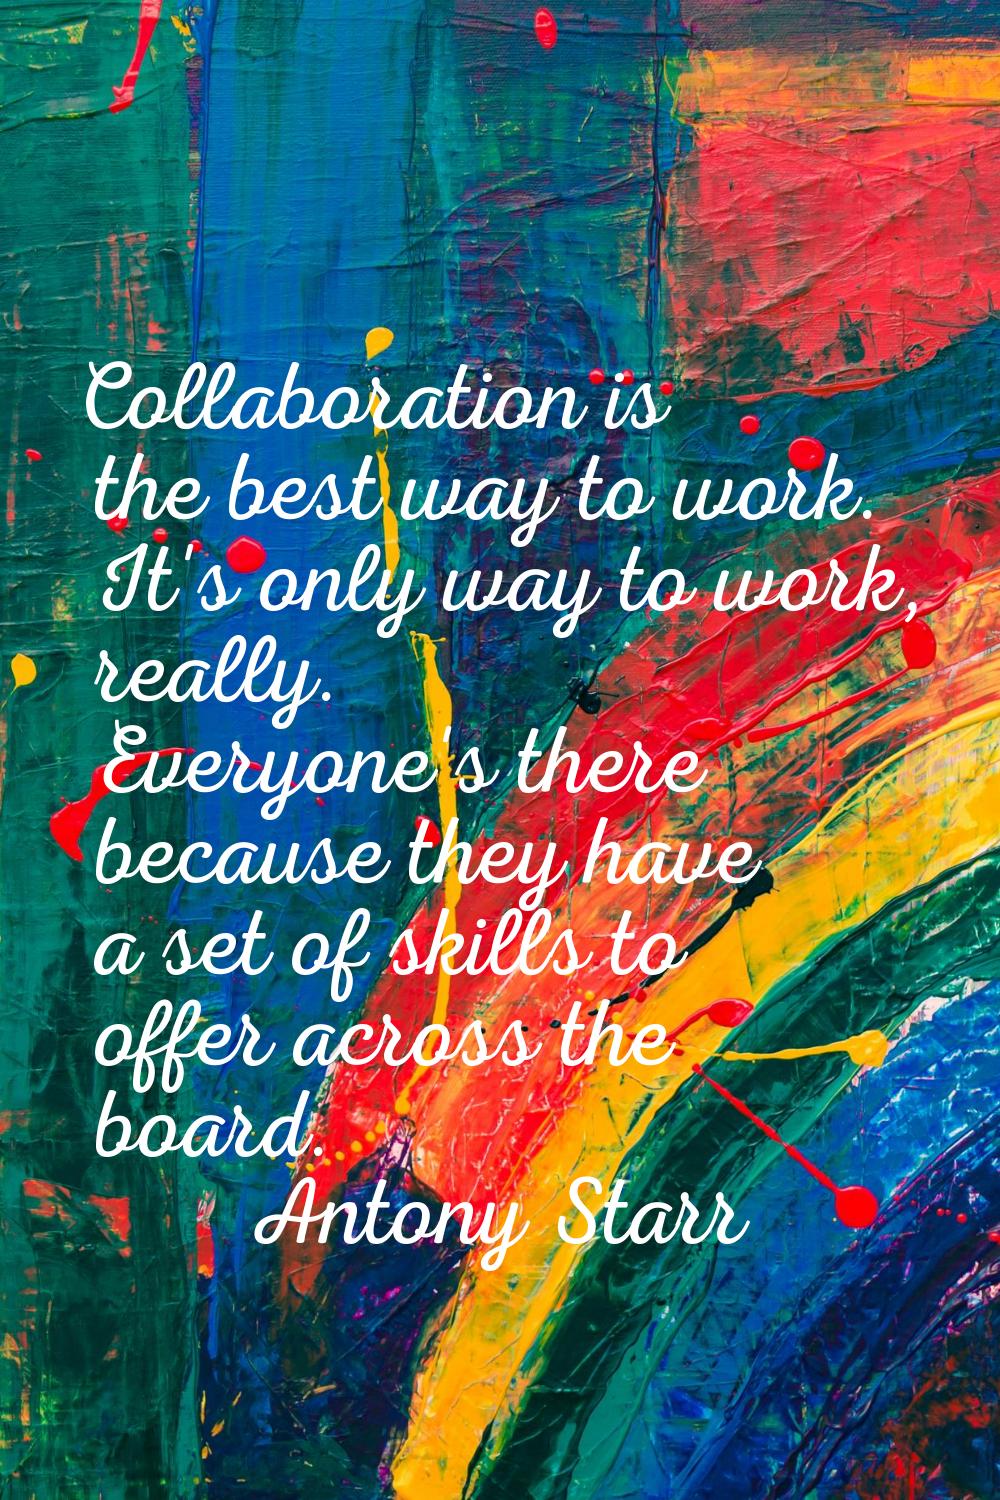 Collaboration is the best way to work. It's only way to work, really. Everyone's there because they